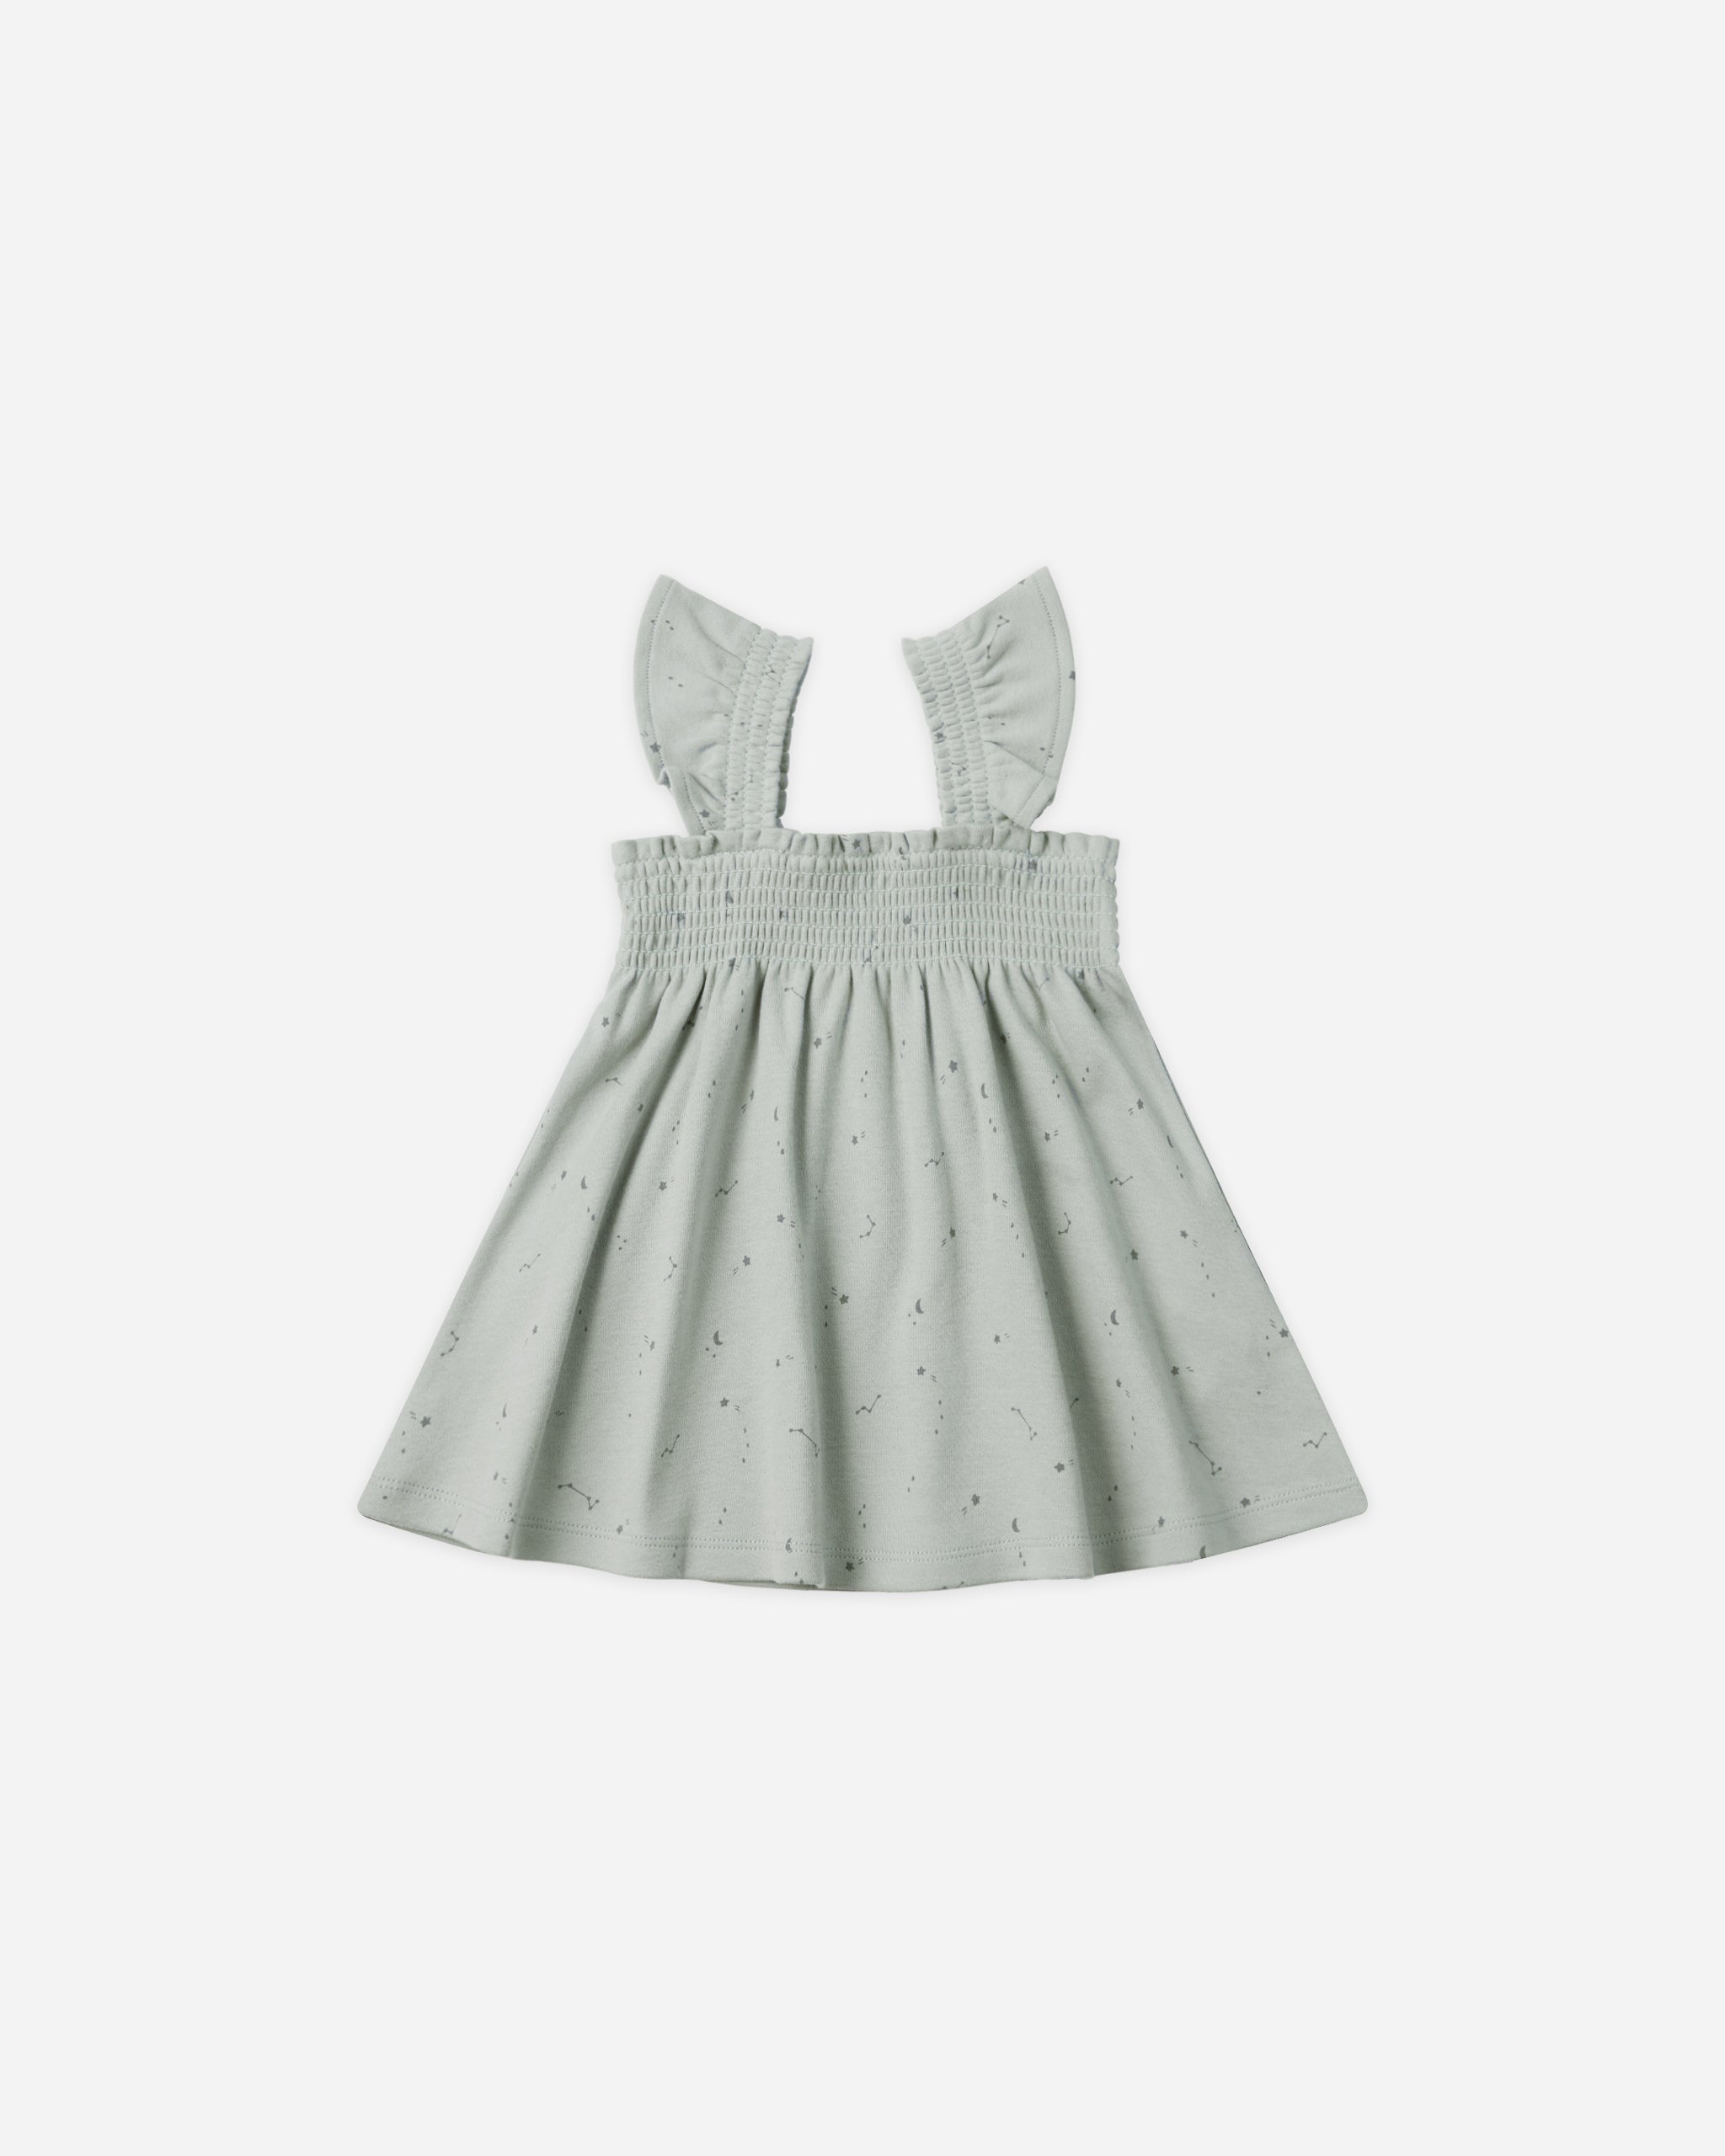 Smocked Jersey Dress || Constellations - Rylee + Cru | Kids Clothes | Trendy Baby Clothes | Modern Infant Outfits |